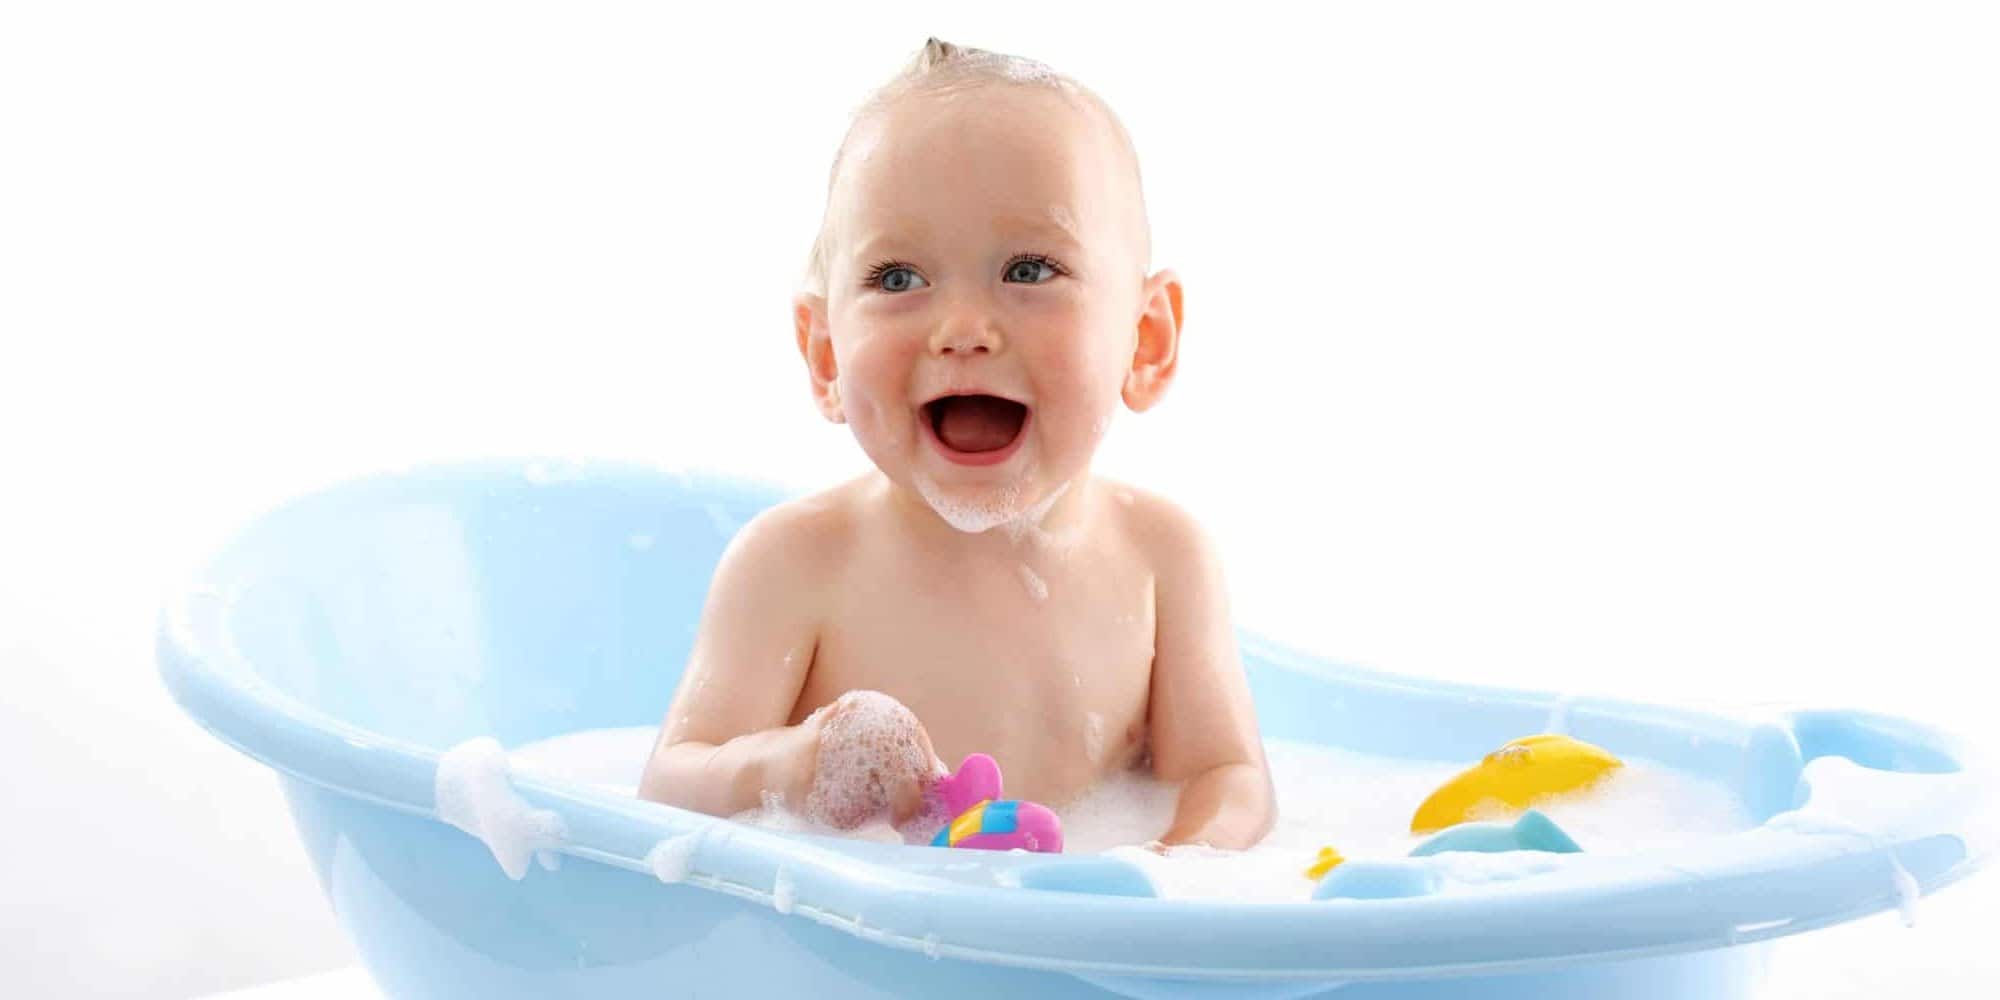 what is the best time to bathe a newborn baby